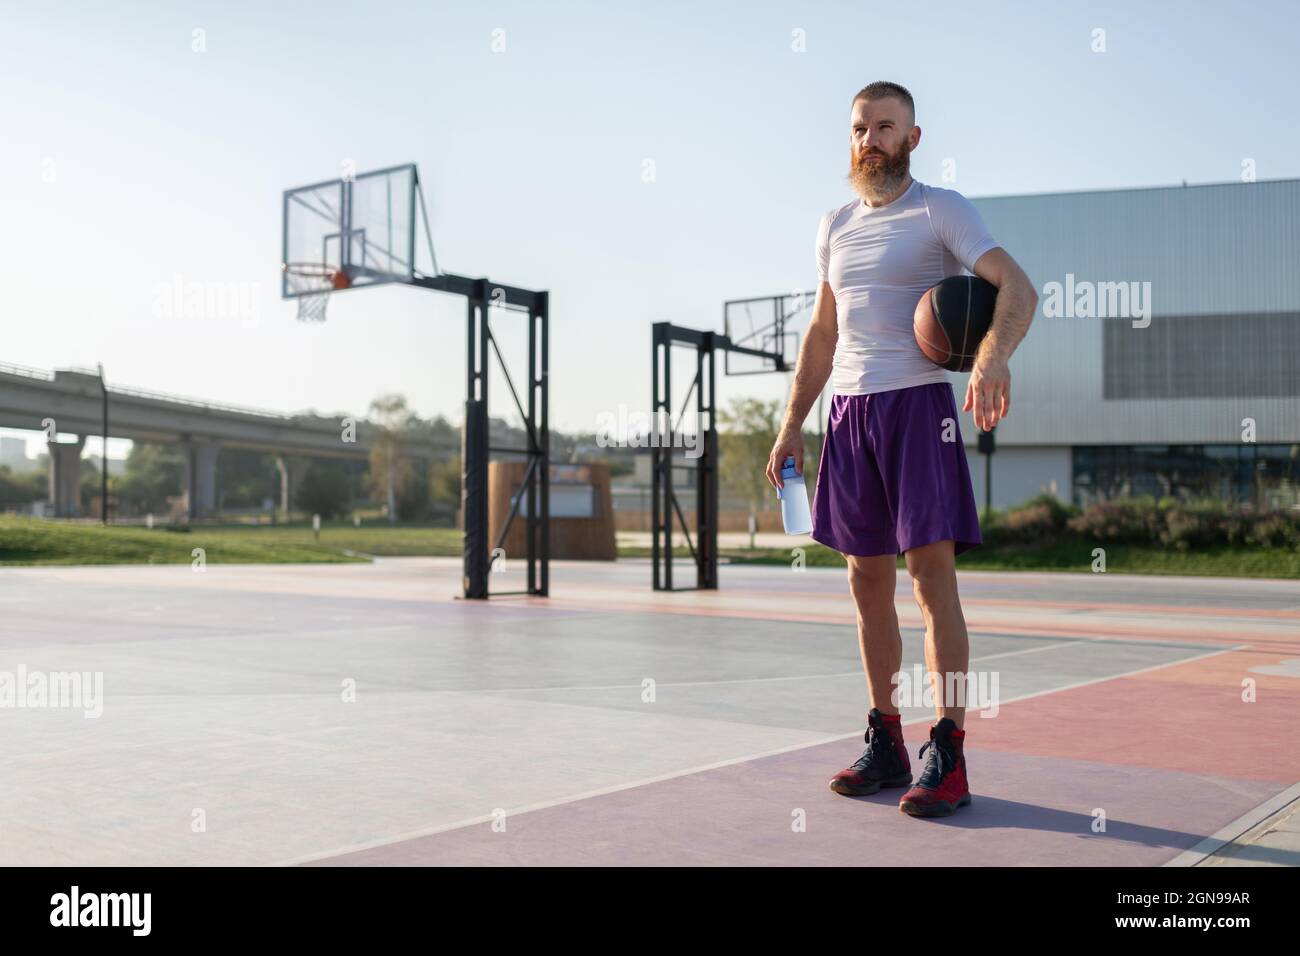 Sportsman with bottle and ball standing on streetball court during training Stock Photo